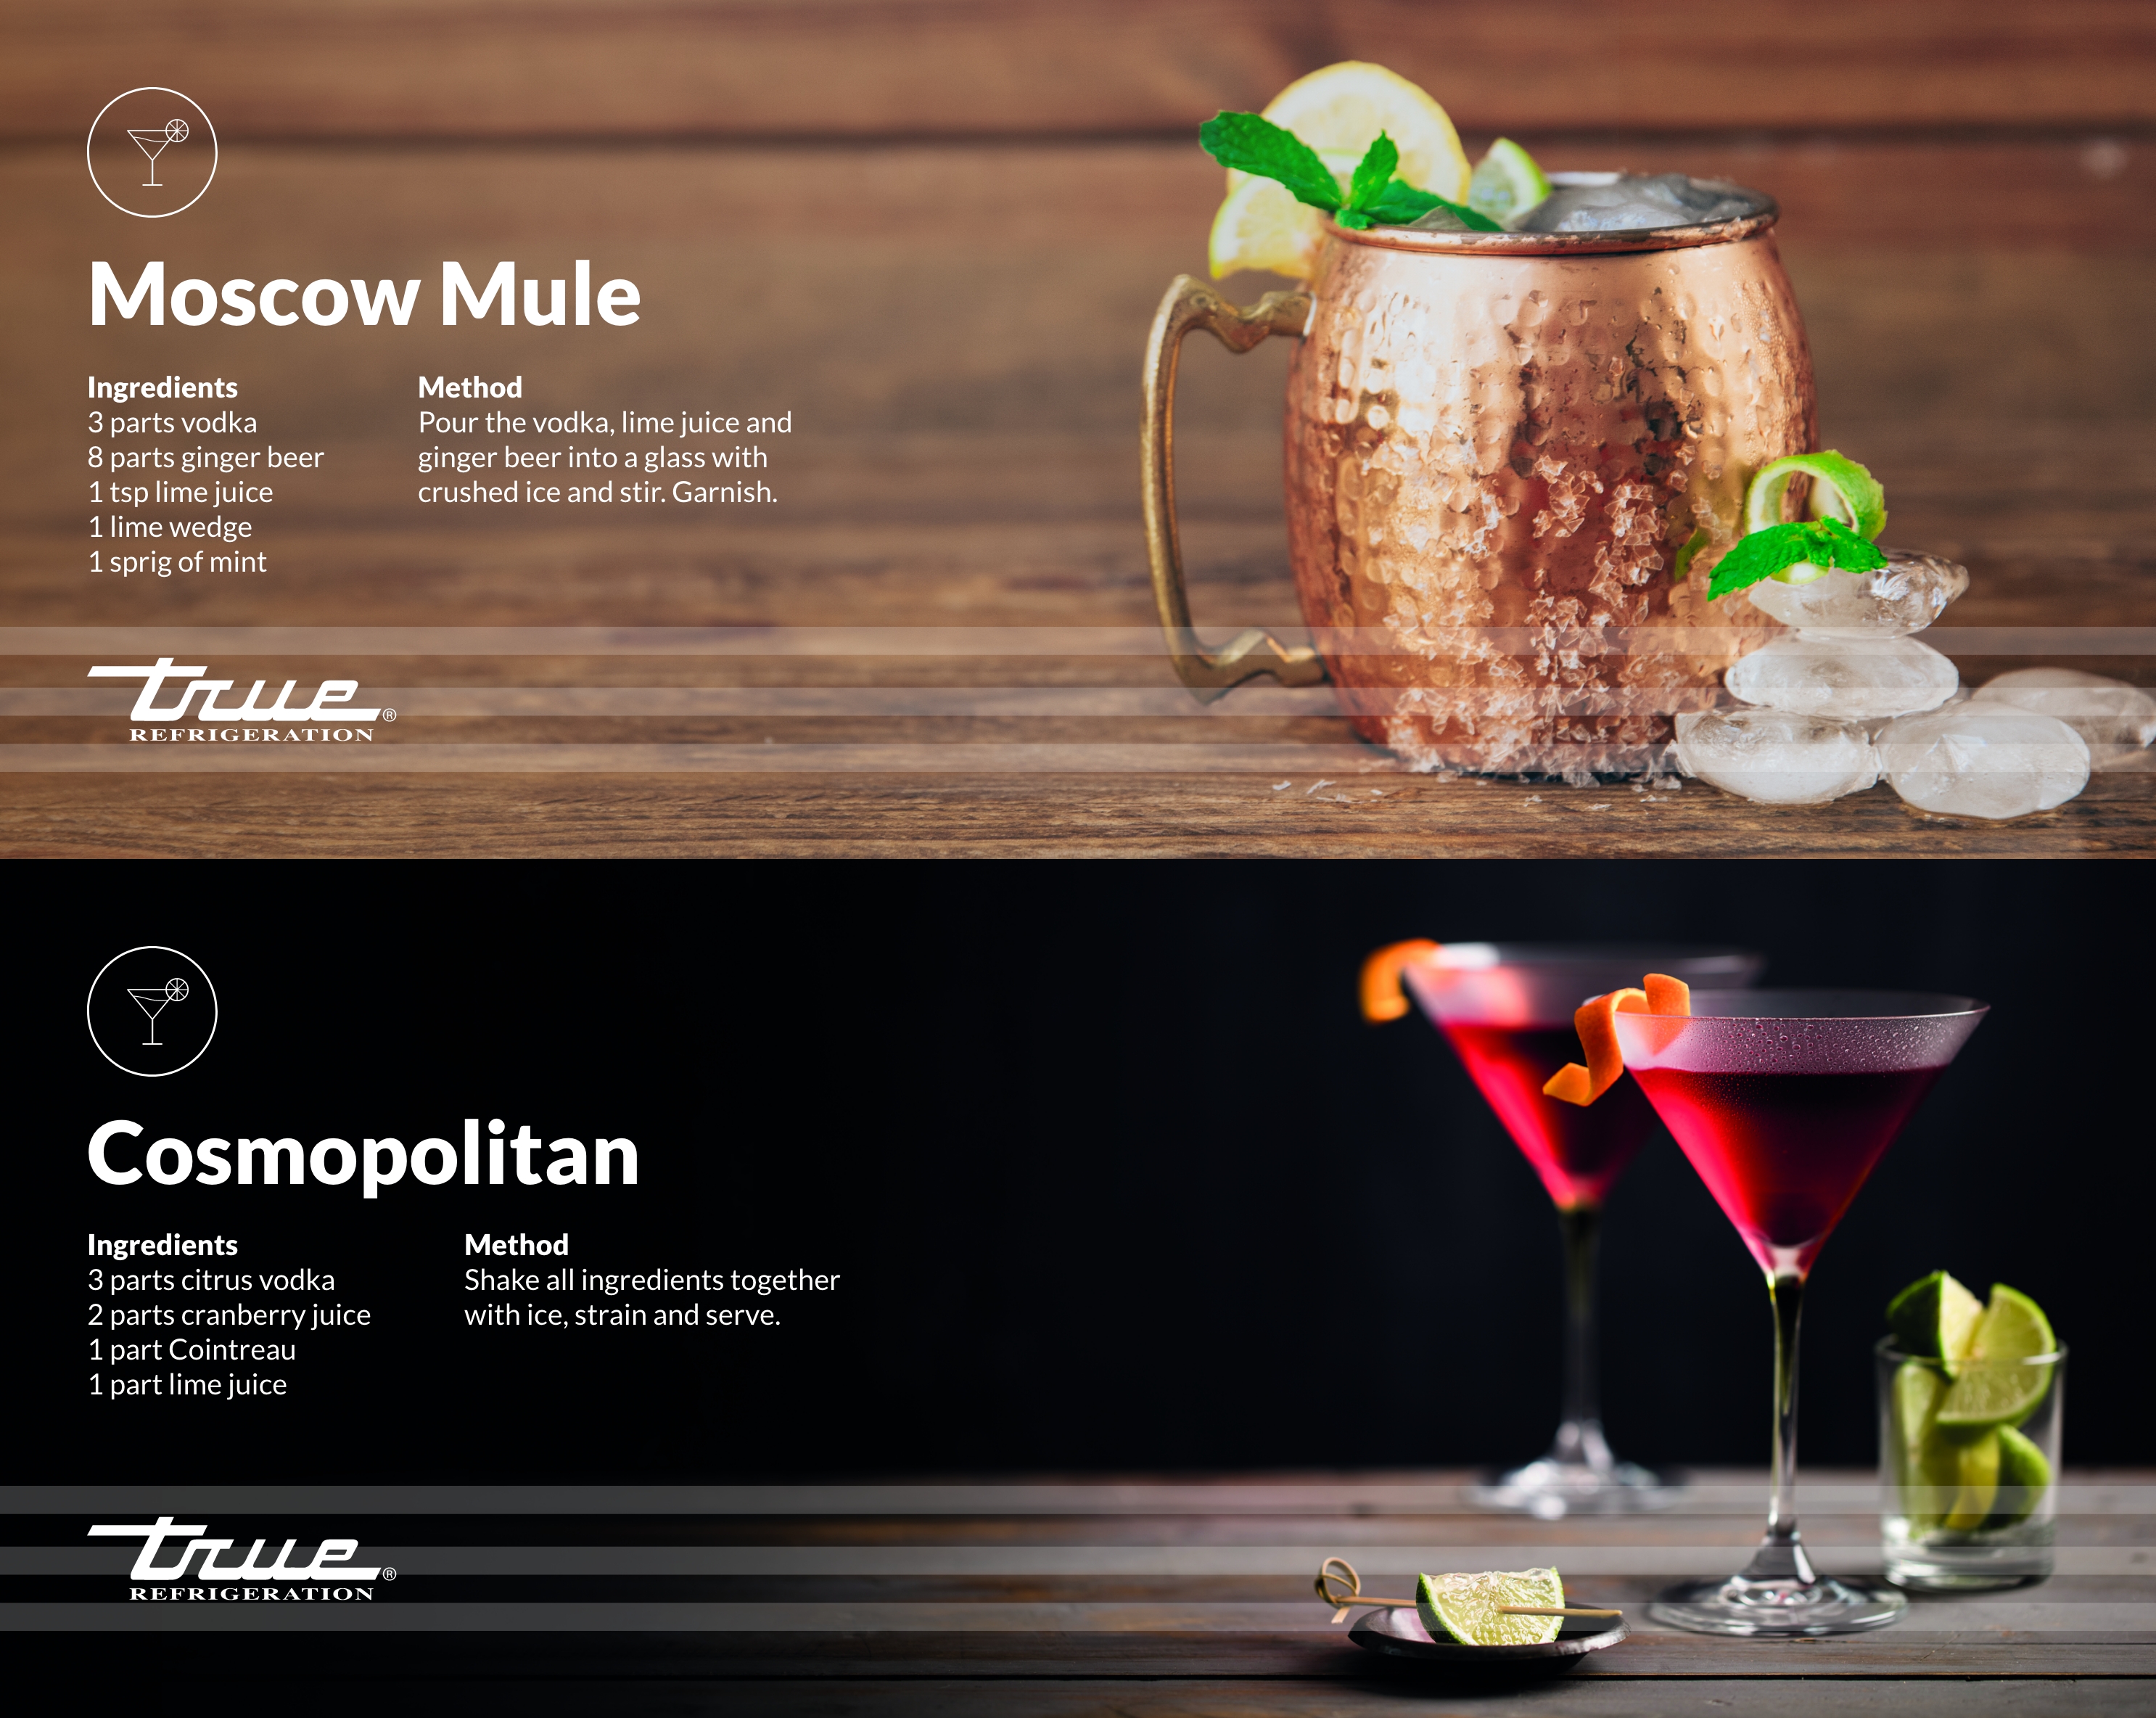 There is nothing worse than a poorly made cocktail, but thanks to this infographic you'll never make another one again.